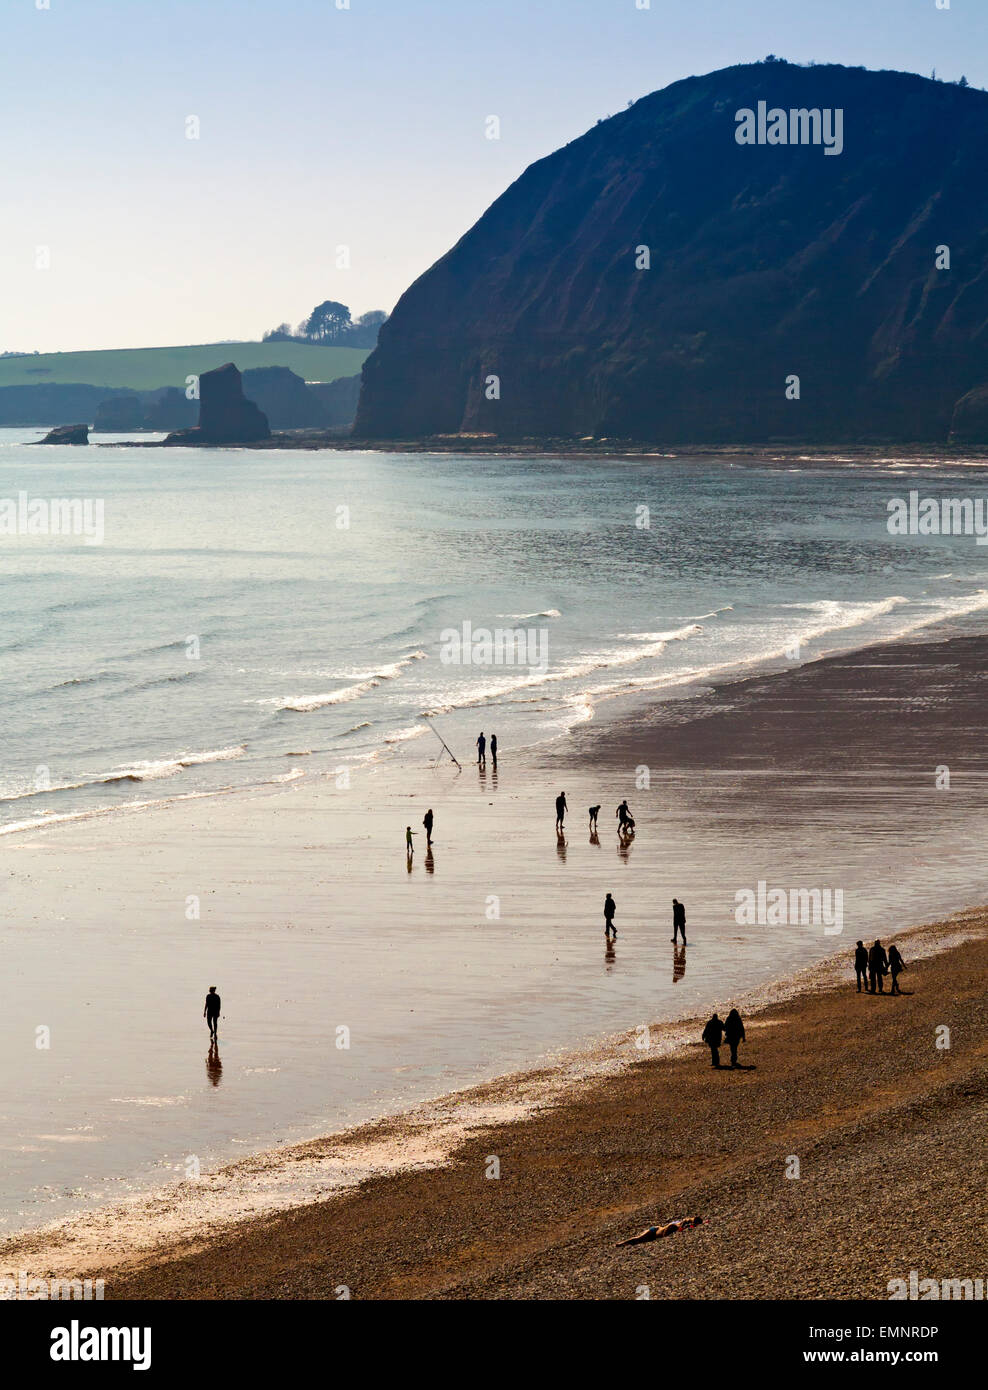 View looking down on to the beach at Sidmouth a popular holiday resort on the Jurassic Coast in south Devon England UK Stock Photo